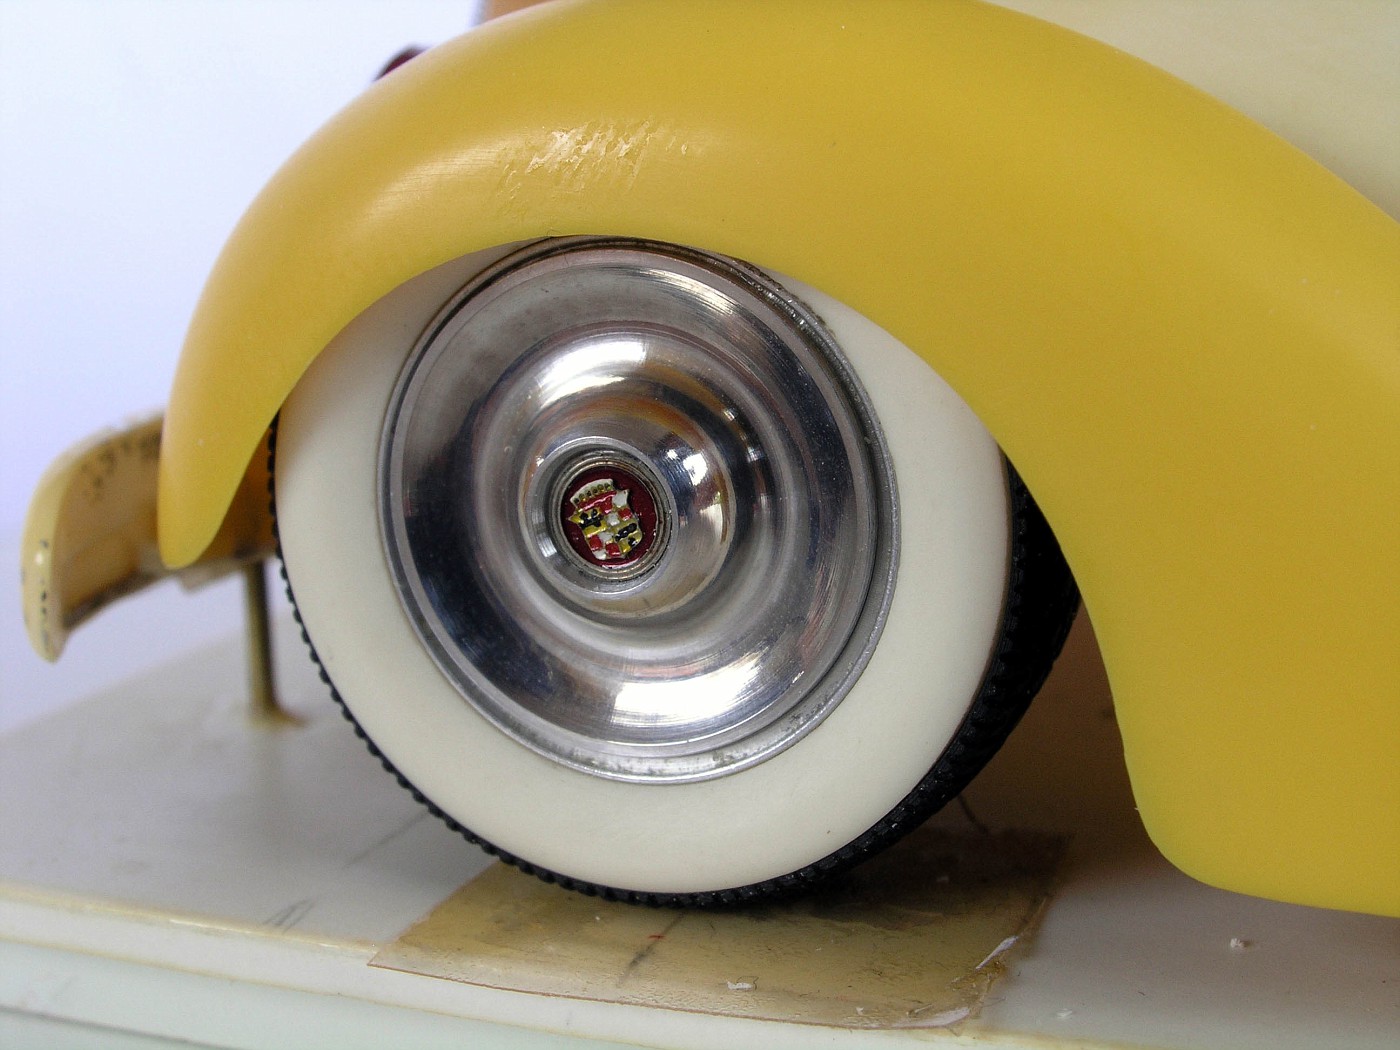 1/25 1955 Cadillac sombrero hubcaps - Model Building Questions and Answers  - Model Cars Magazine Forum